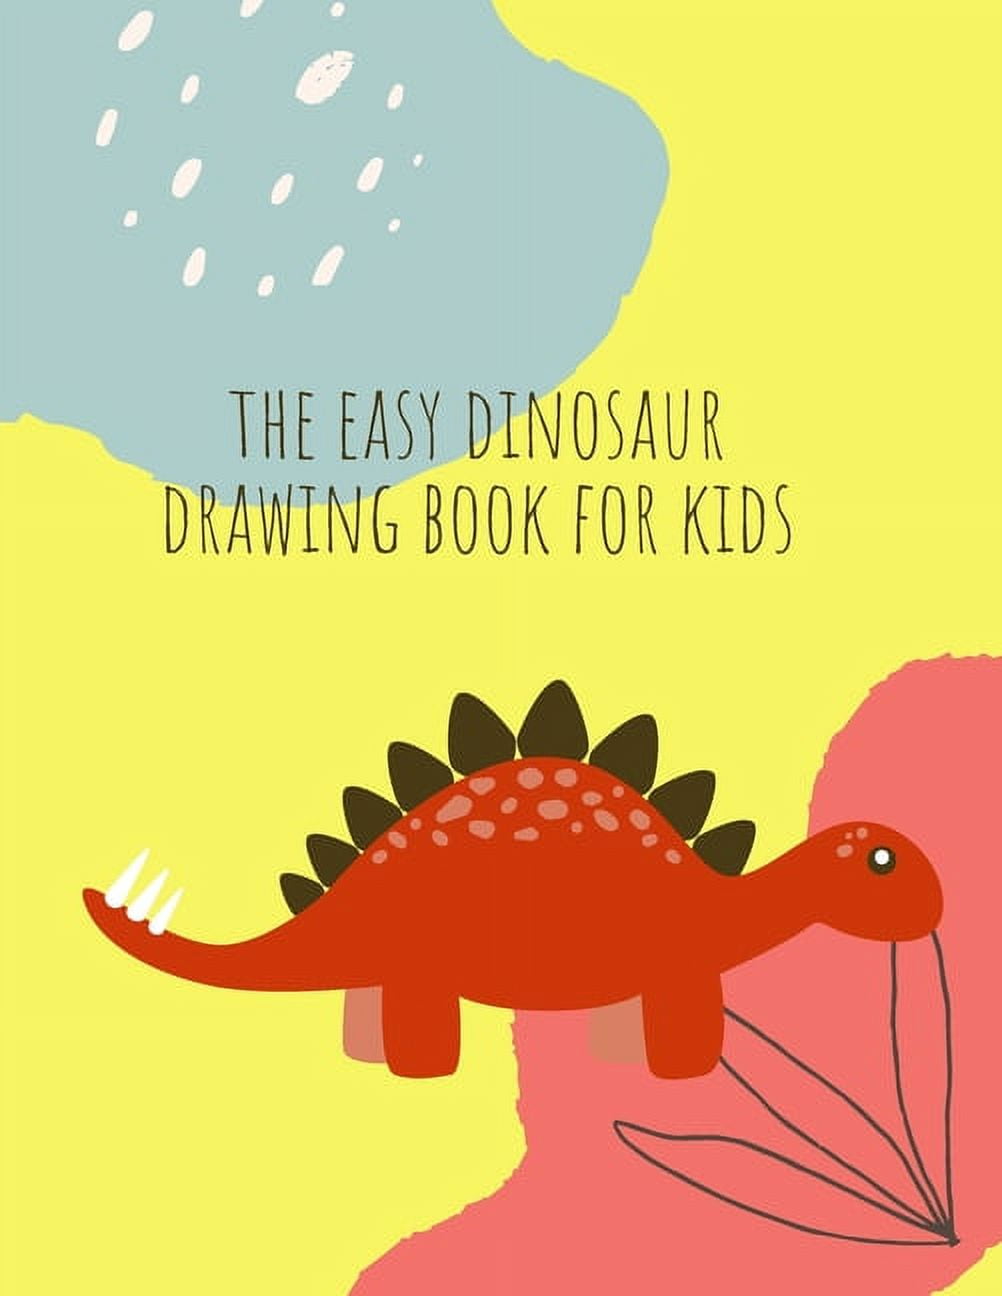 Dino Sketchbook for Kids ages 4-8 Blank Paper for Drawing.